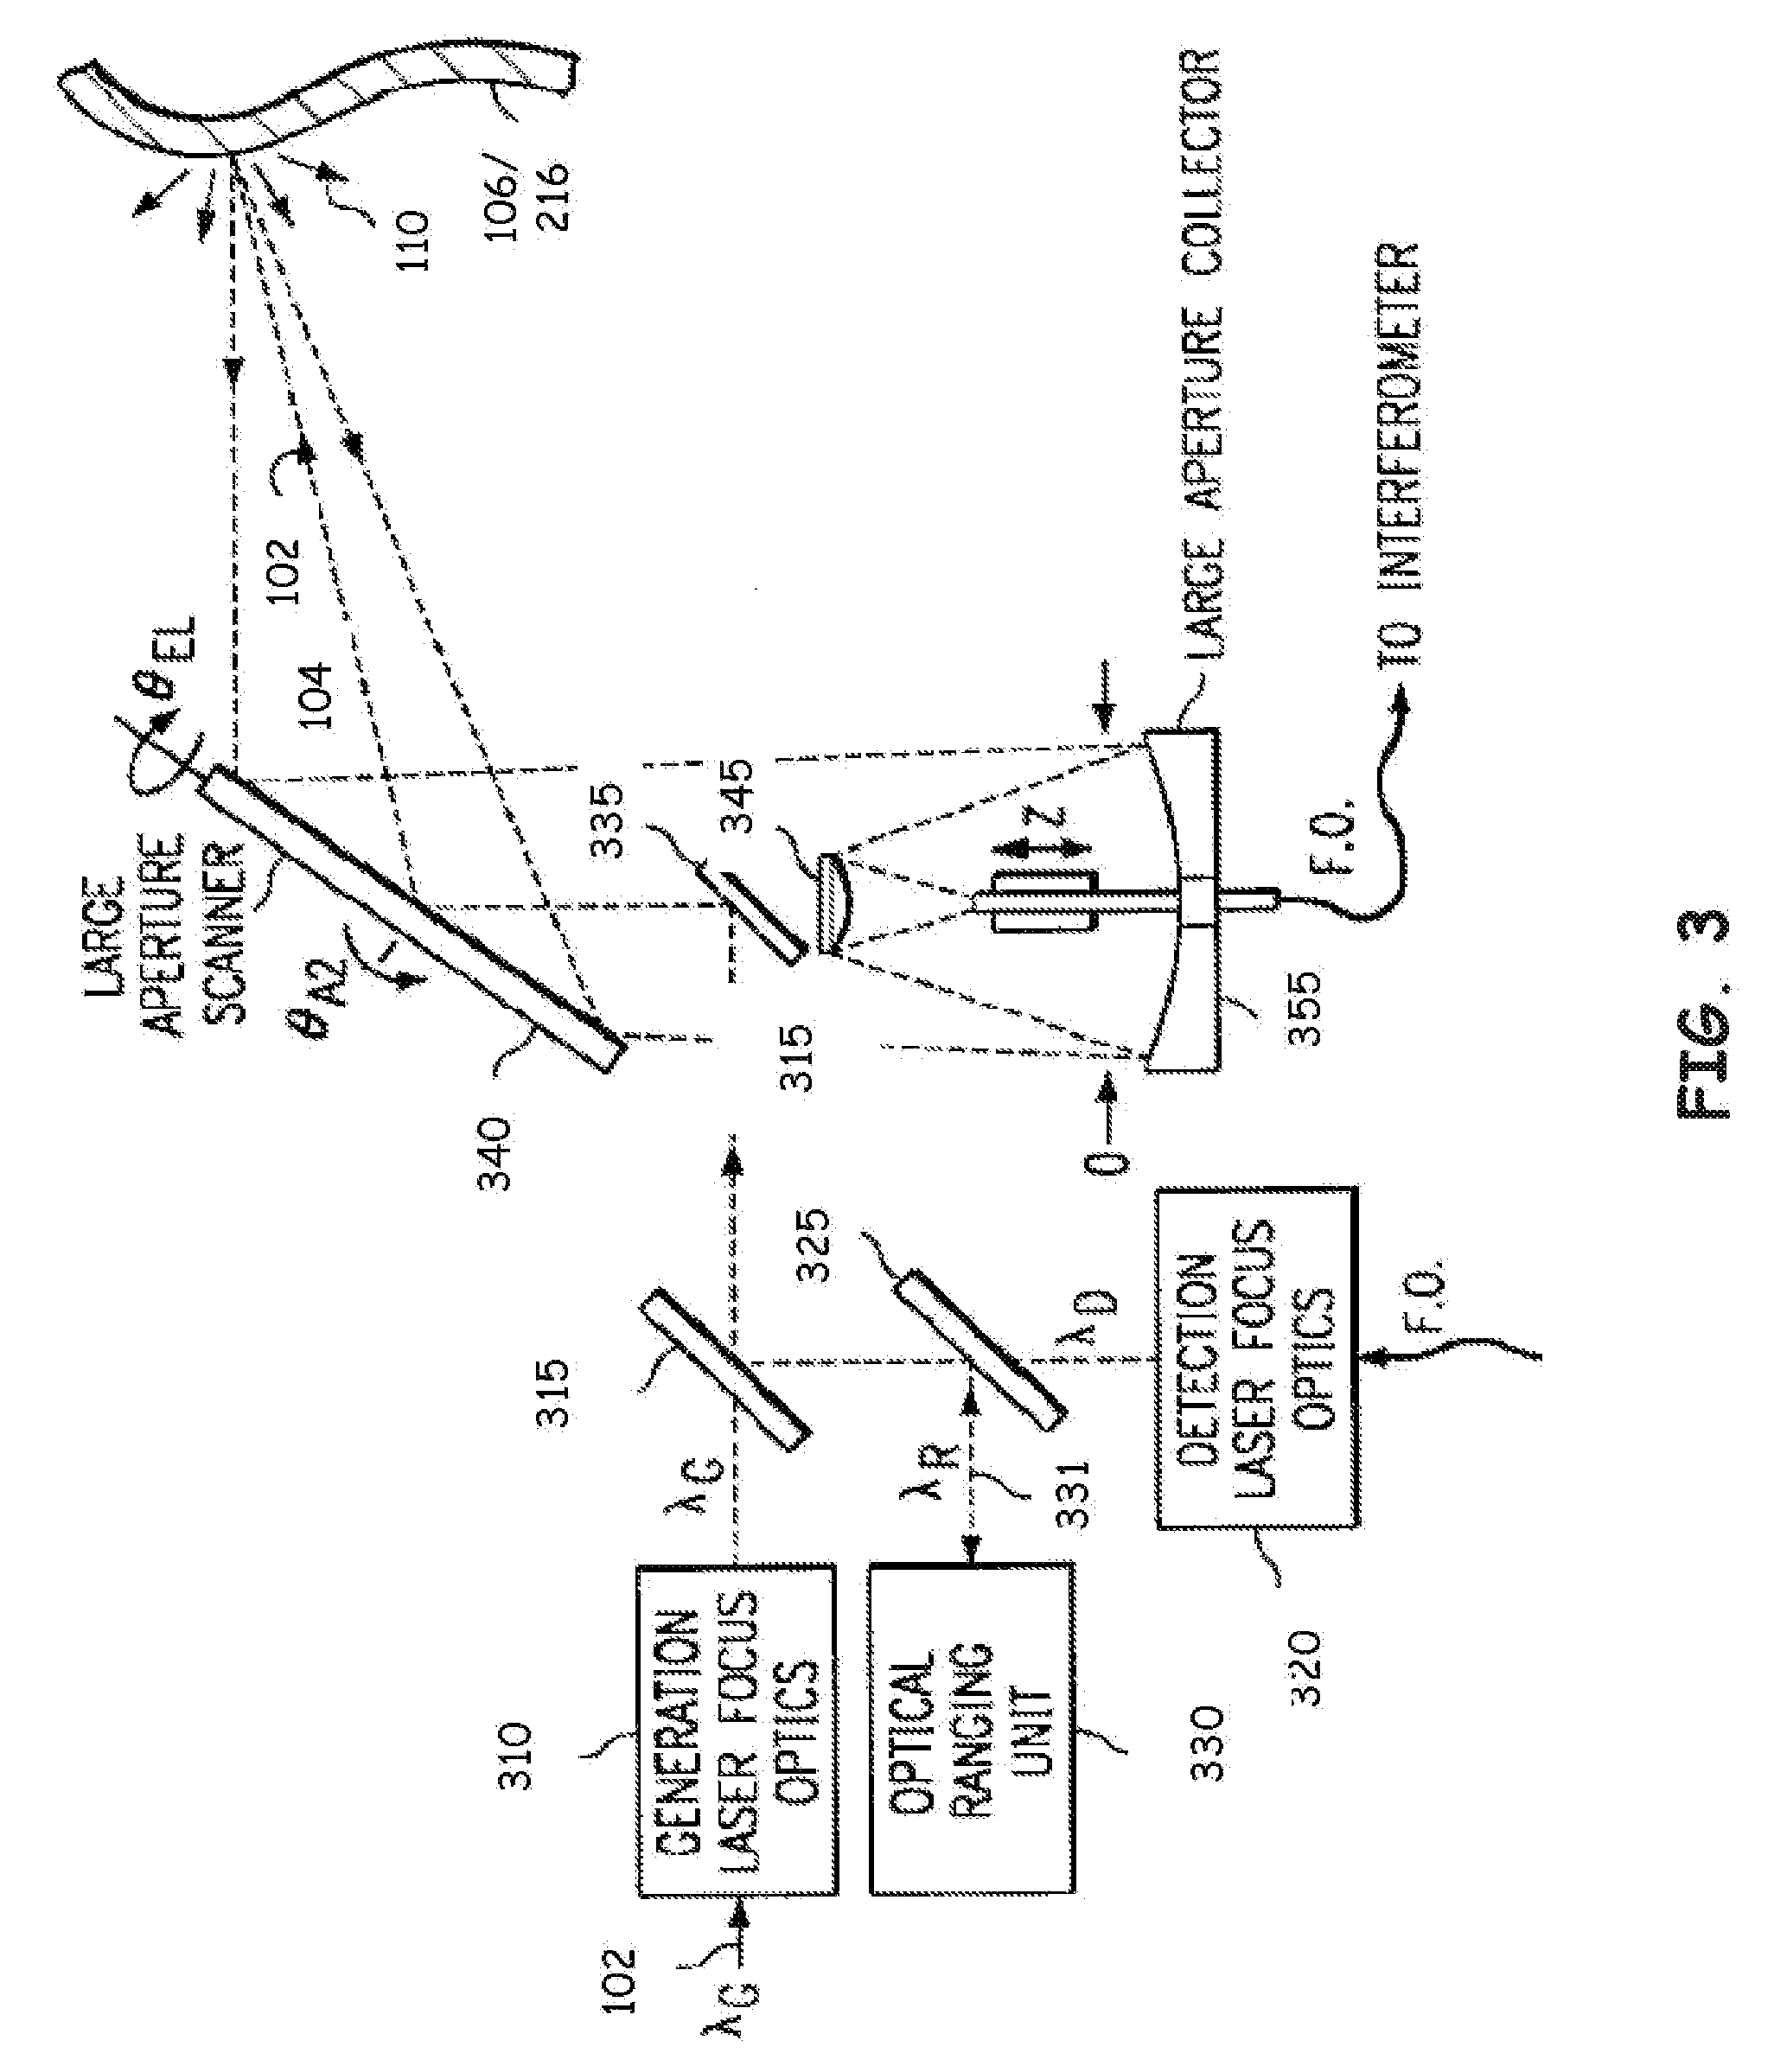 Apparatus and method for two wave mixing (TWM) based ultrasonic laser testing